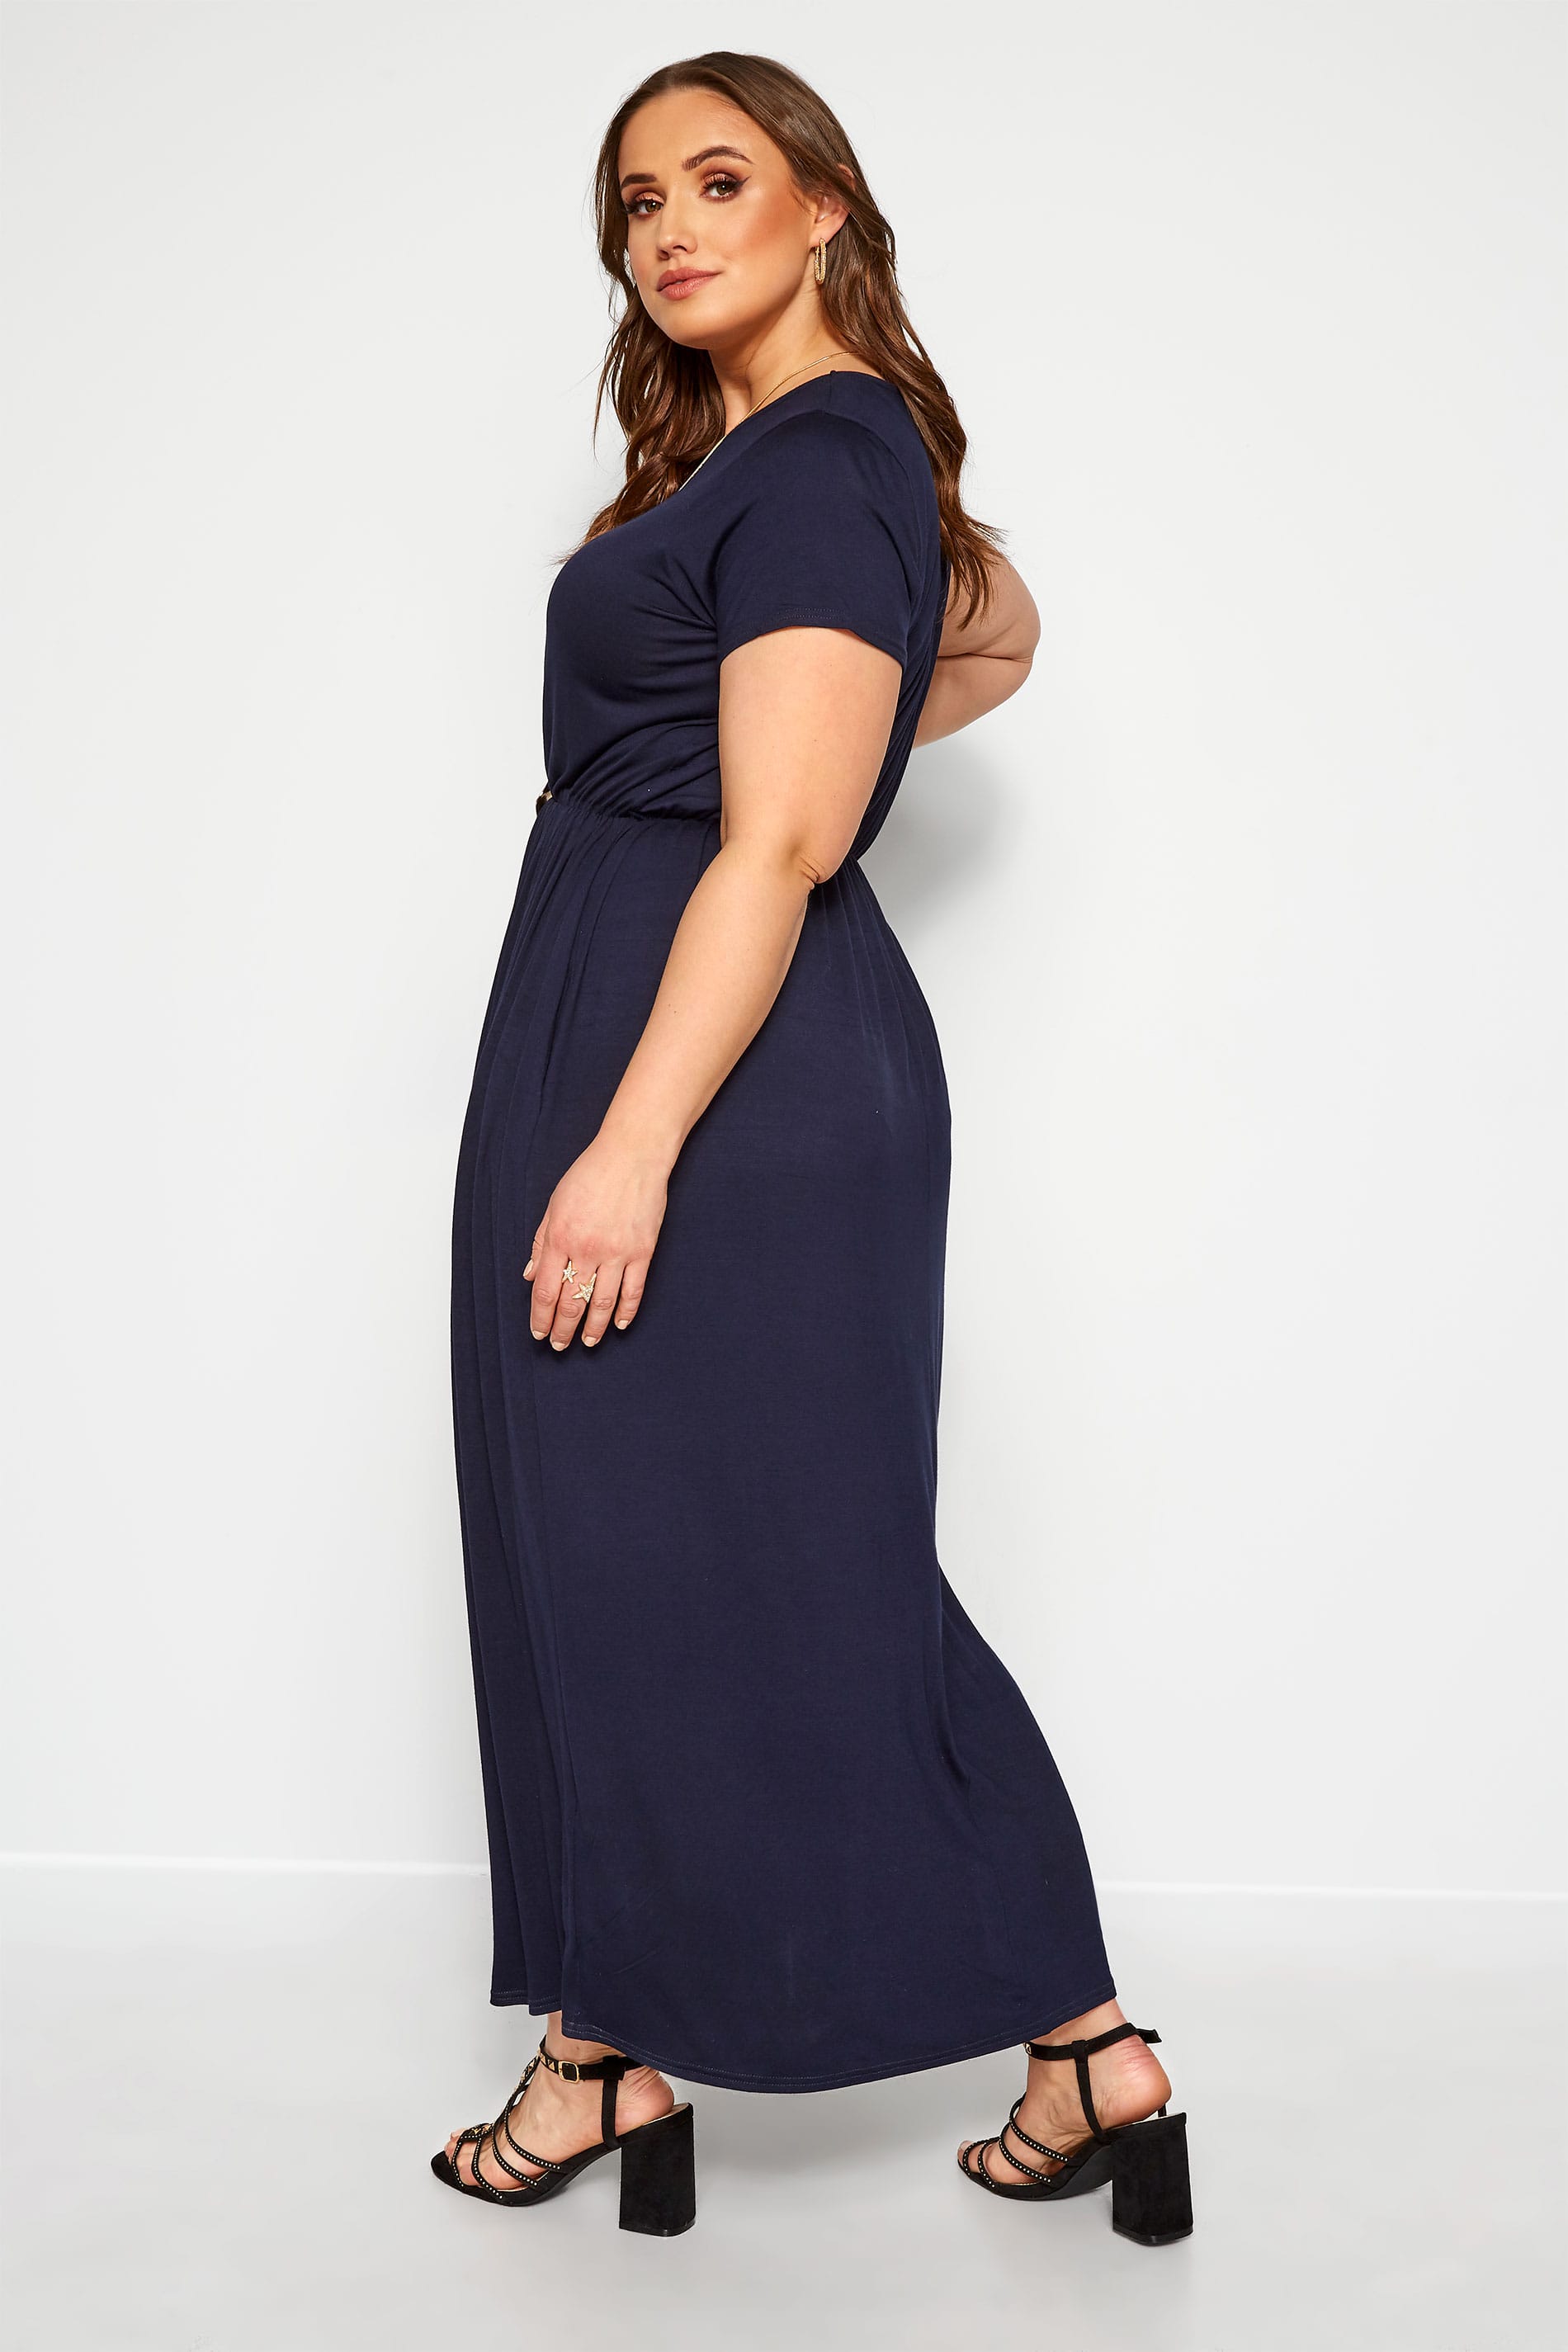 Yours Clothing Women S Plus Size Yours London Pocket Maxi